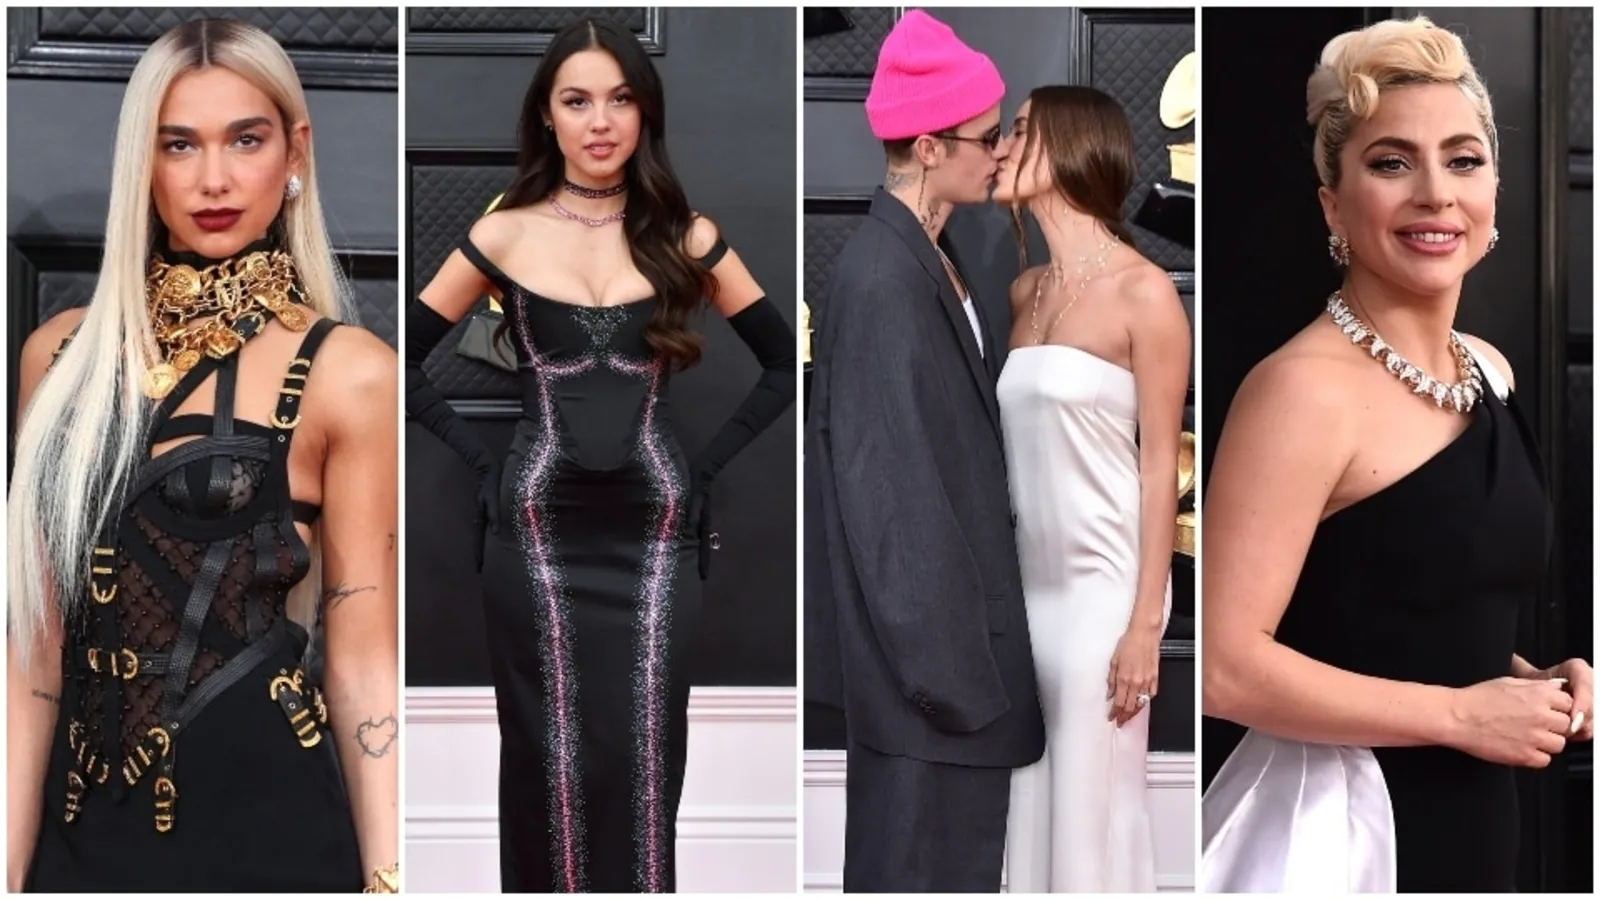 Grammy Awards 2022: Here’s a look at all the highlight moments and glamorous outfits from the awards night